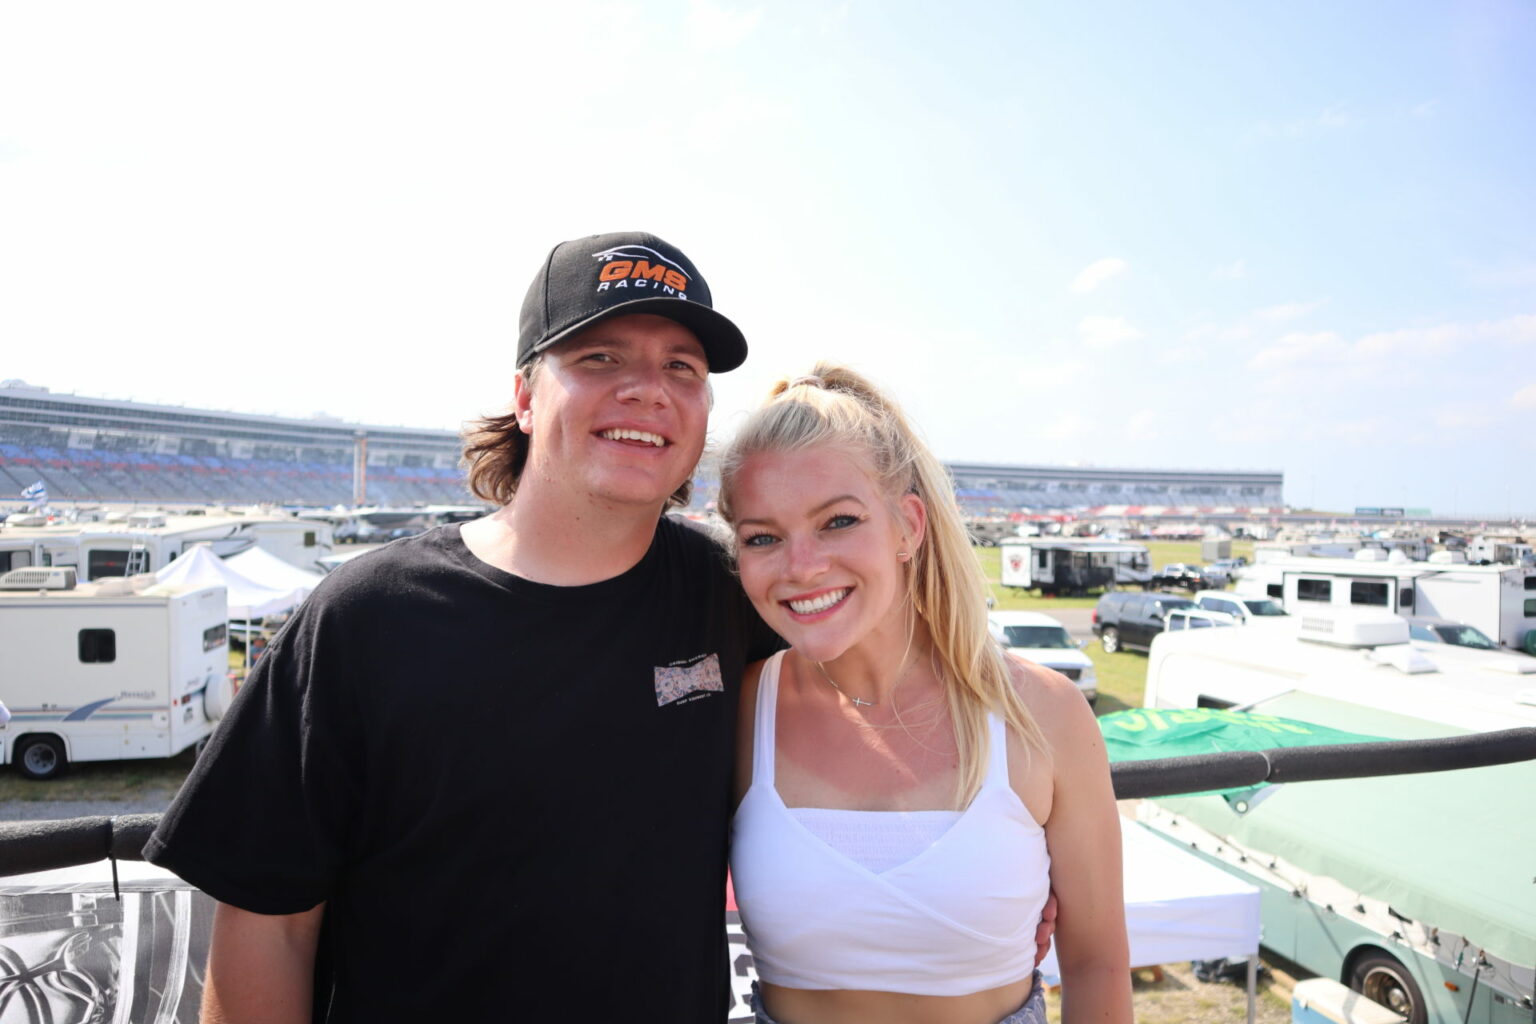 7 Texas Motor Speedway Tailgating Tips: Insider Guide and Highlights for the NASCAR All-Star Race 18